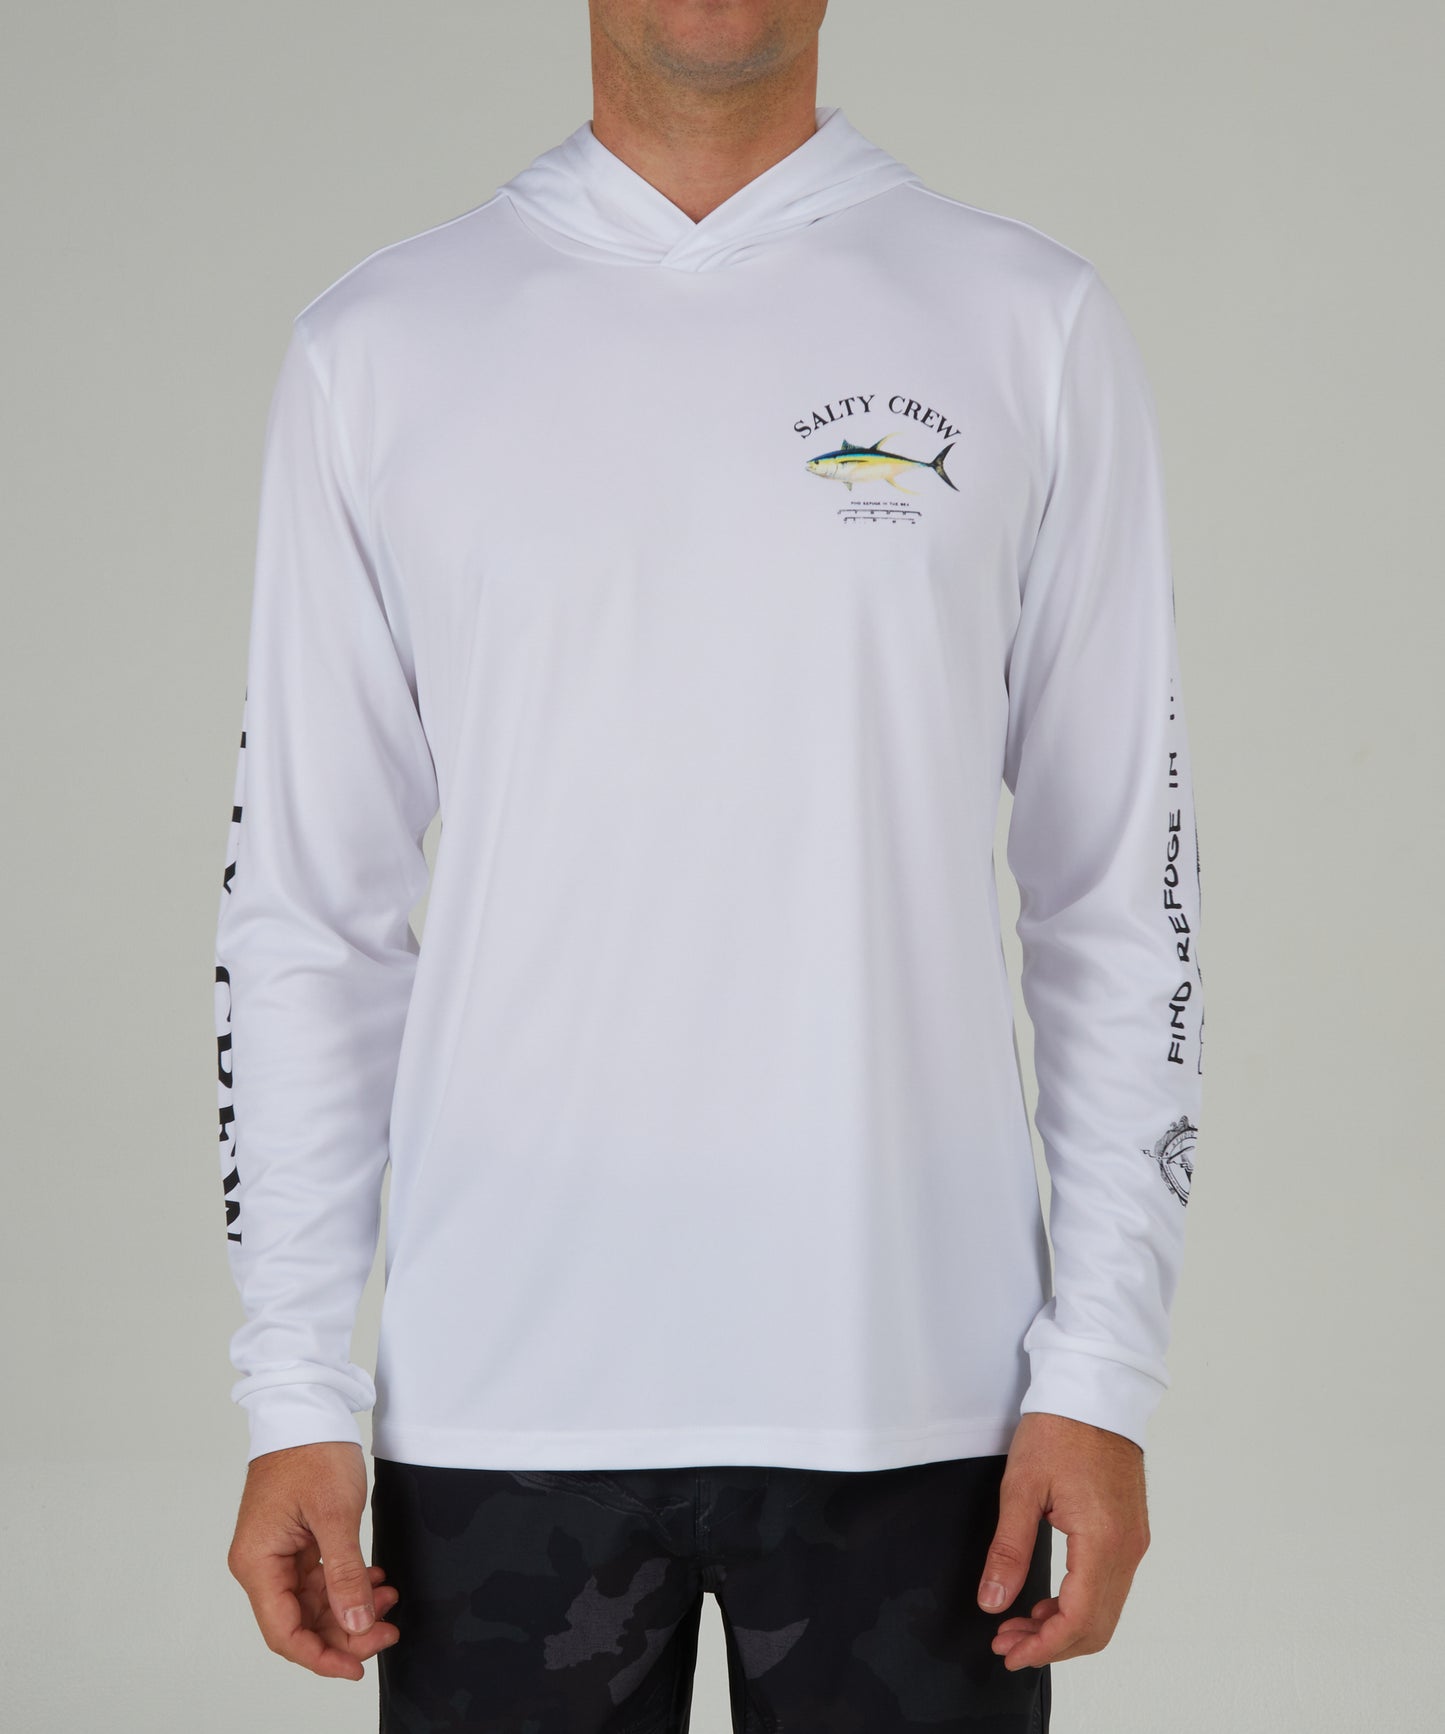 front view of Ahi Mount White Hood Sunshirt